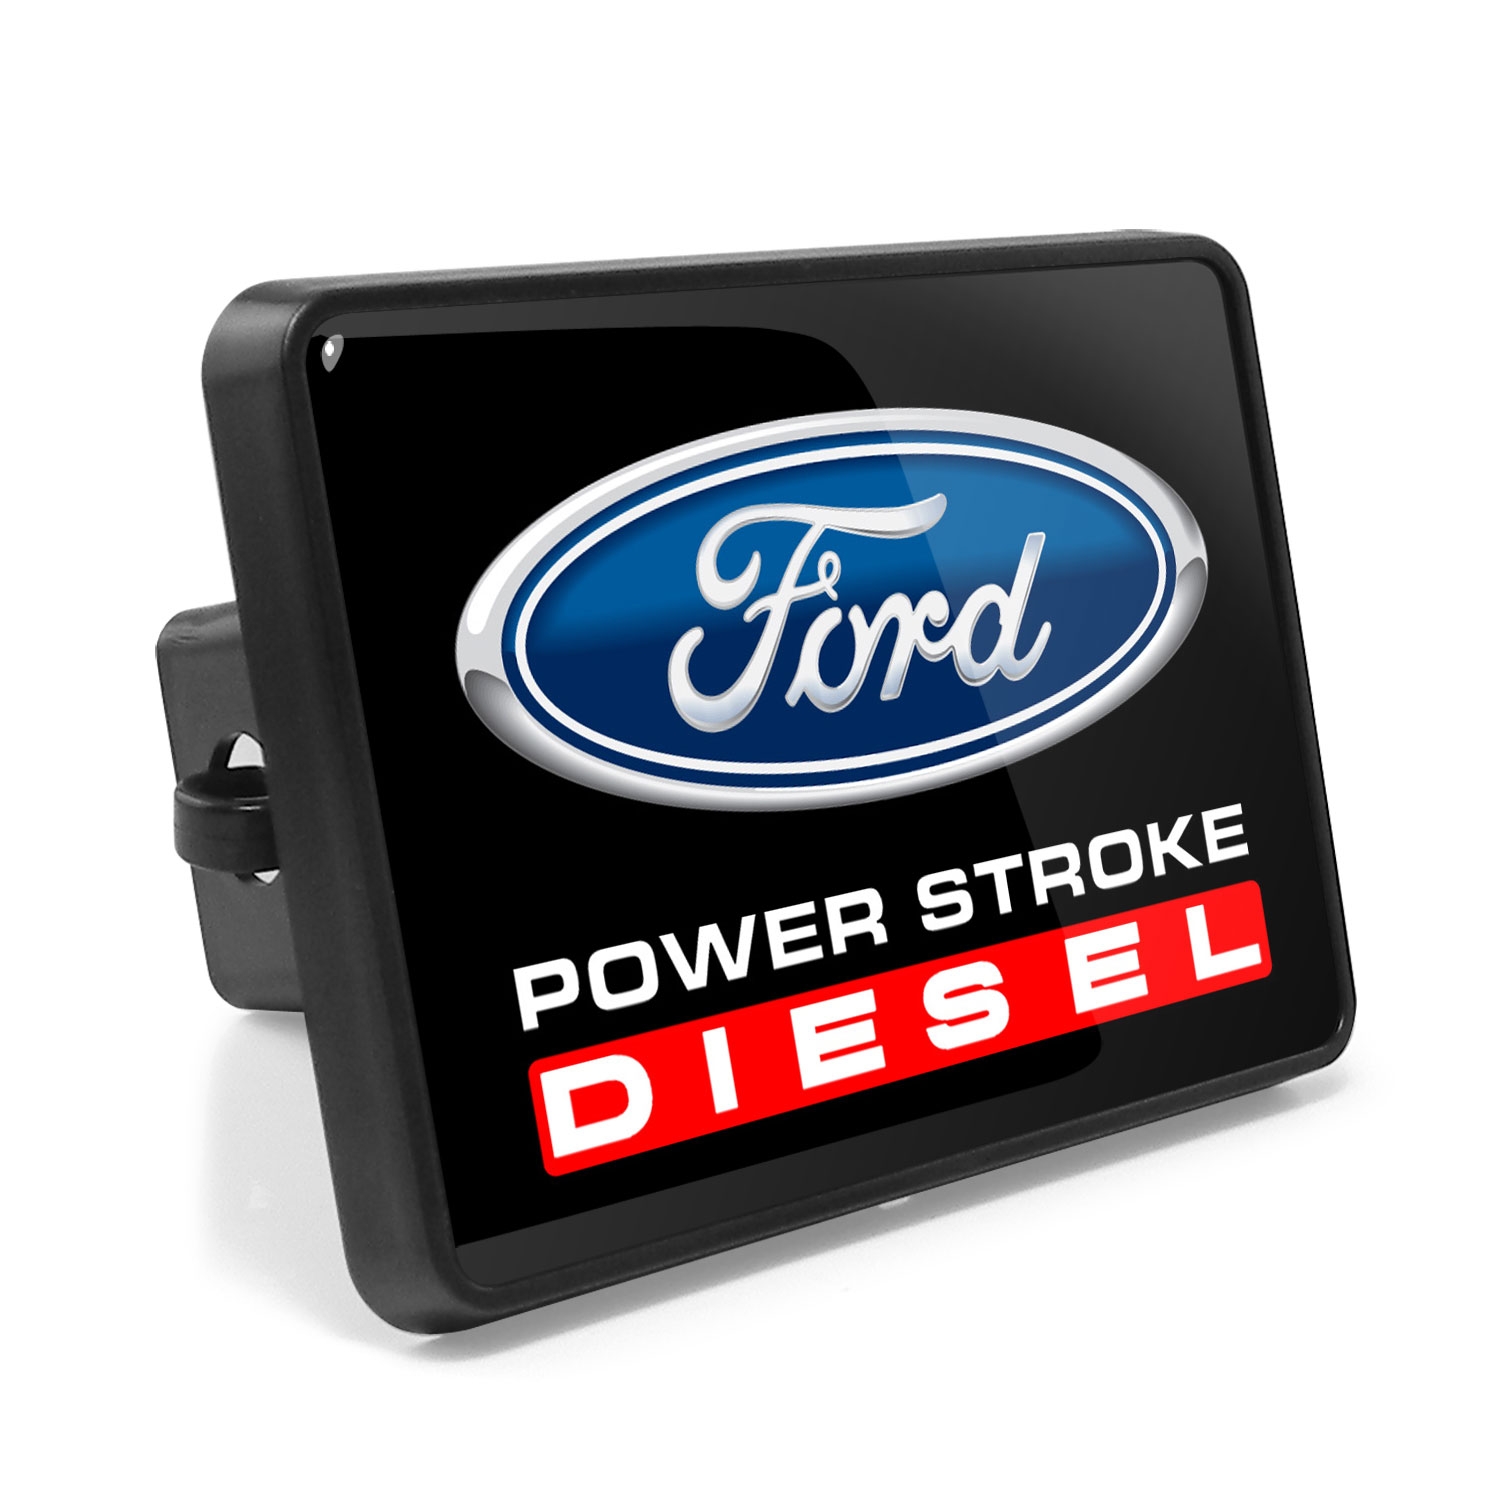 Ford Power-Stroke Diesel UV Graphic Metal Plate on ABS Plastic 2 inch Tow Hitch Cover